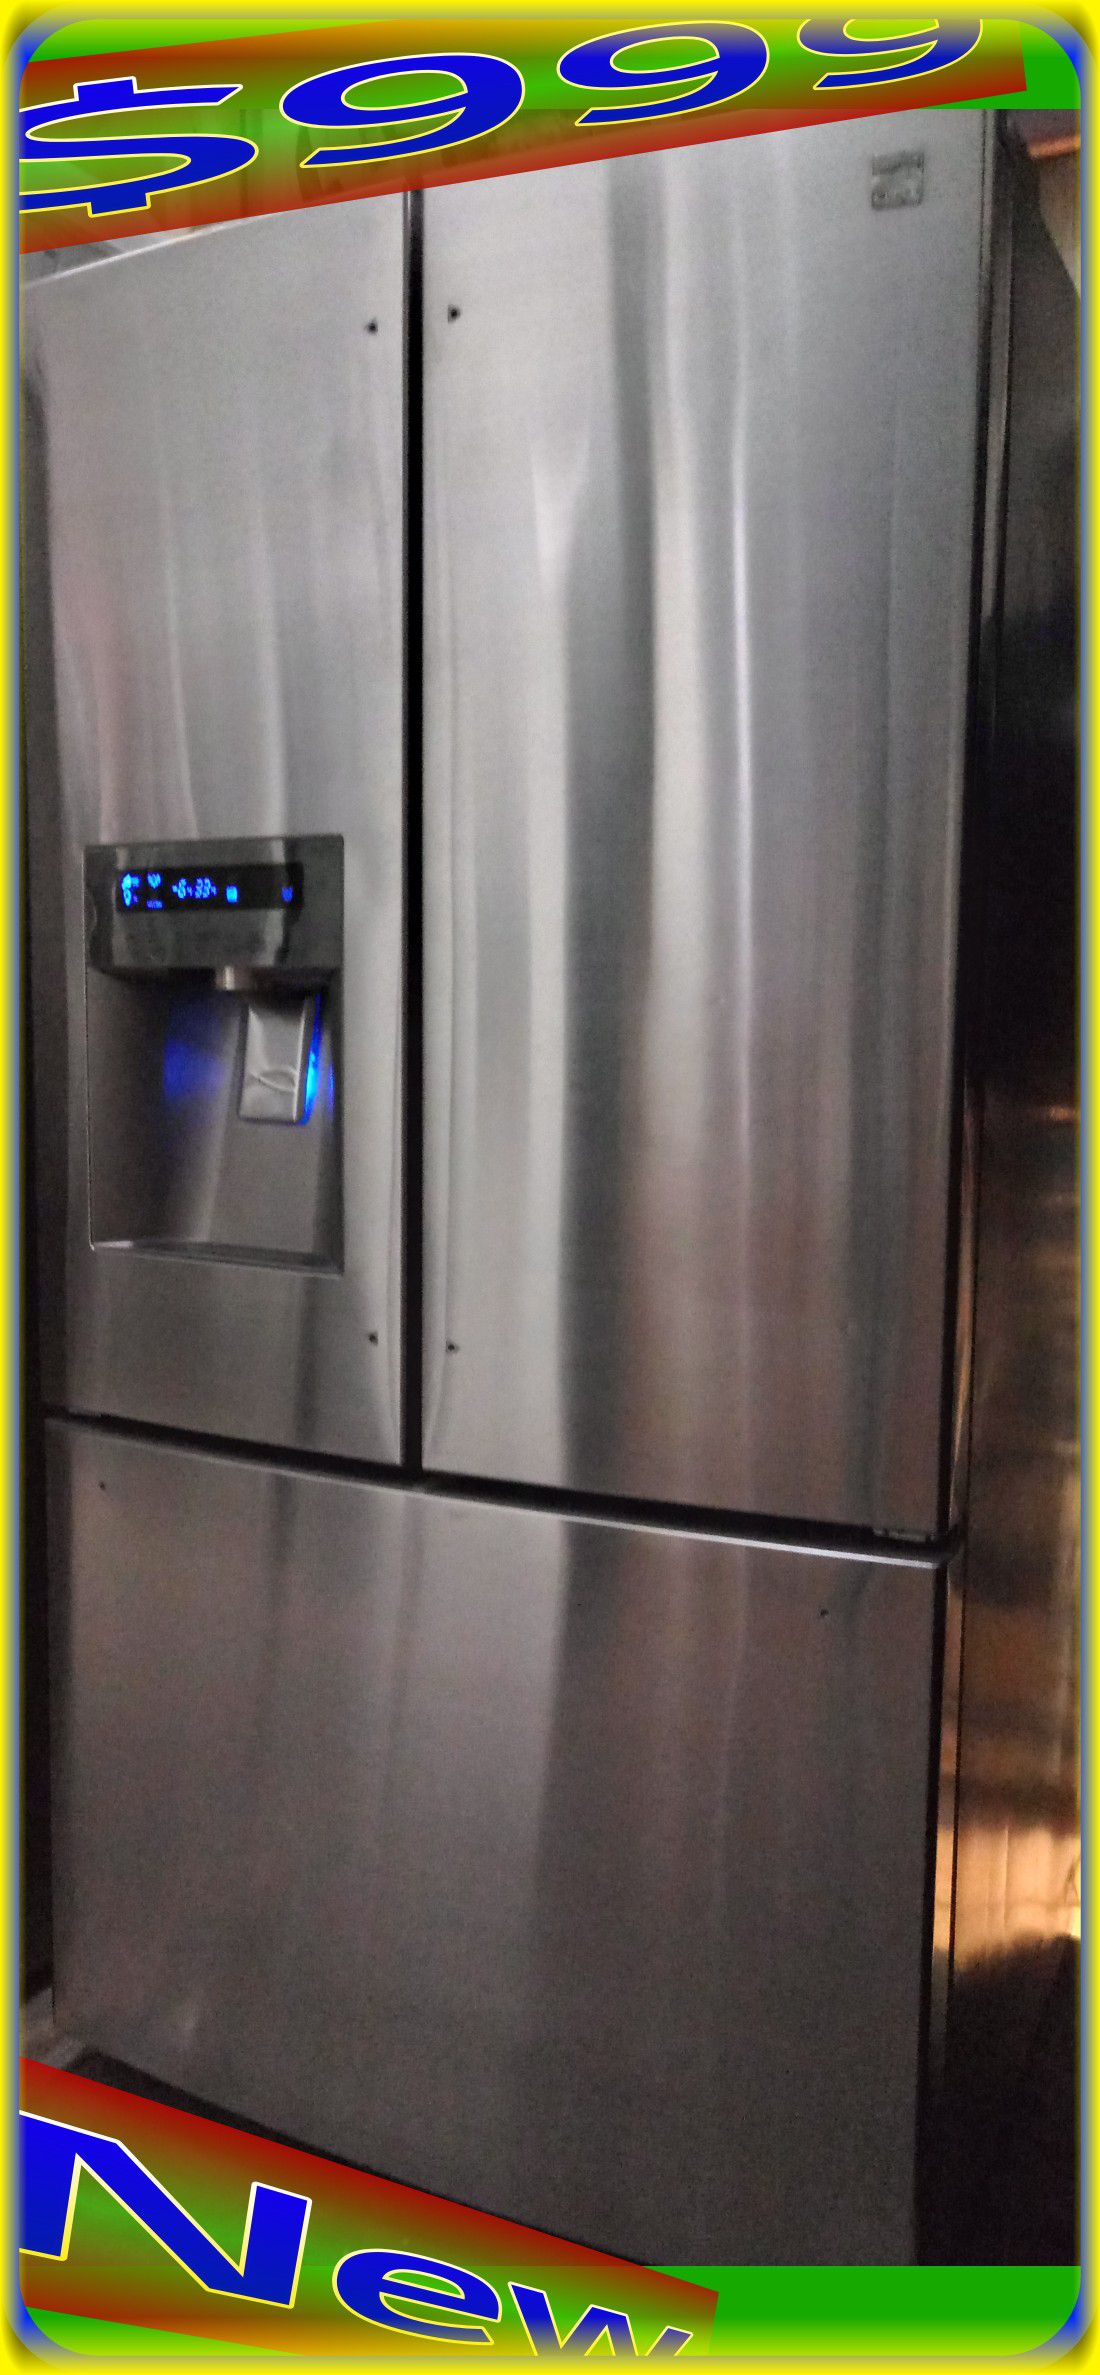 NEW Kenmore Elite by LG 31 cu. ft. French Door Refrigerator Fridge freezer Stainless steel with ice/water dispenser